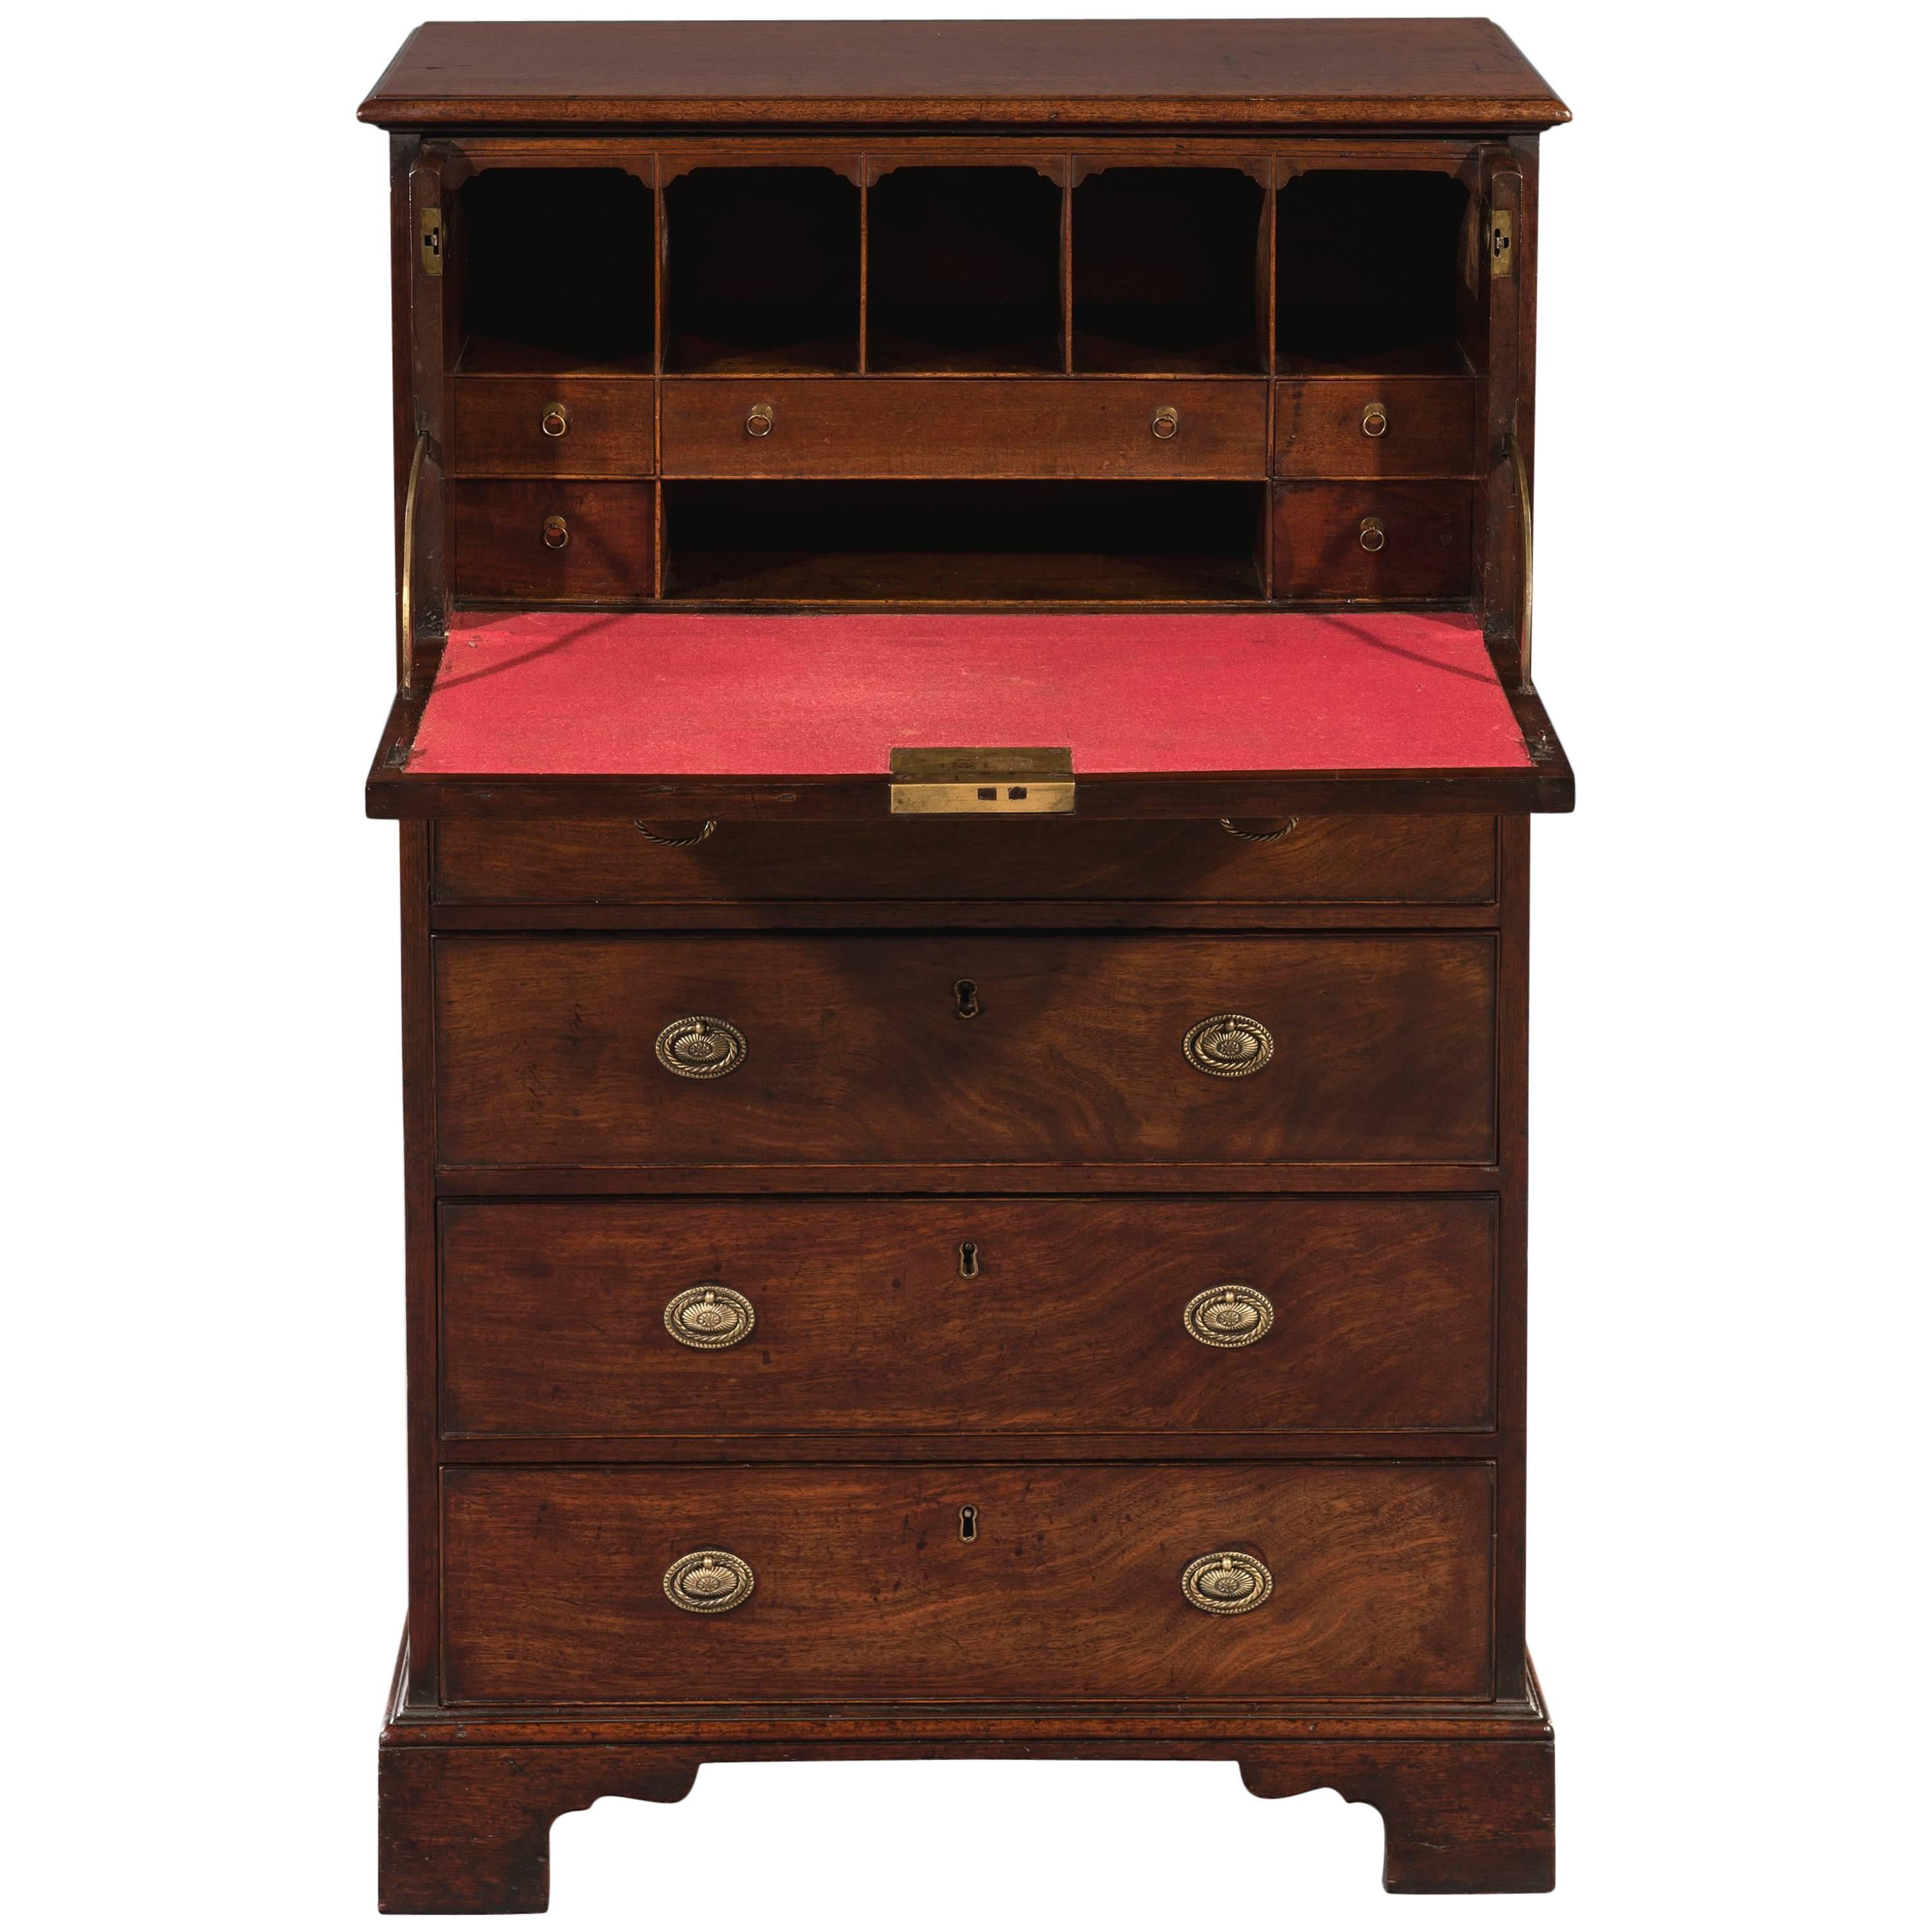 Early George III 18th Century Mahogany Secrétaire Chest of Drawers